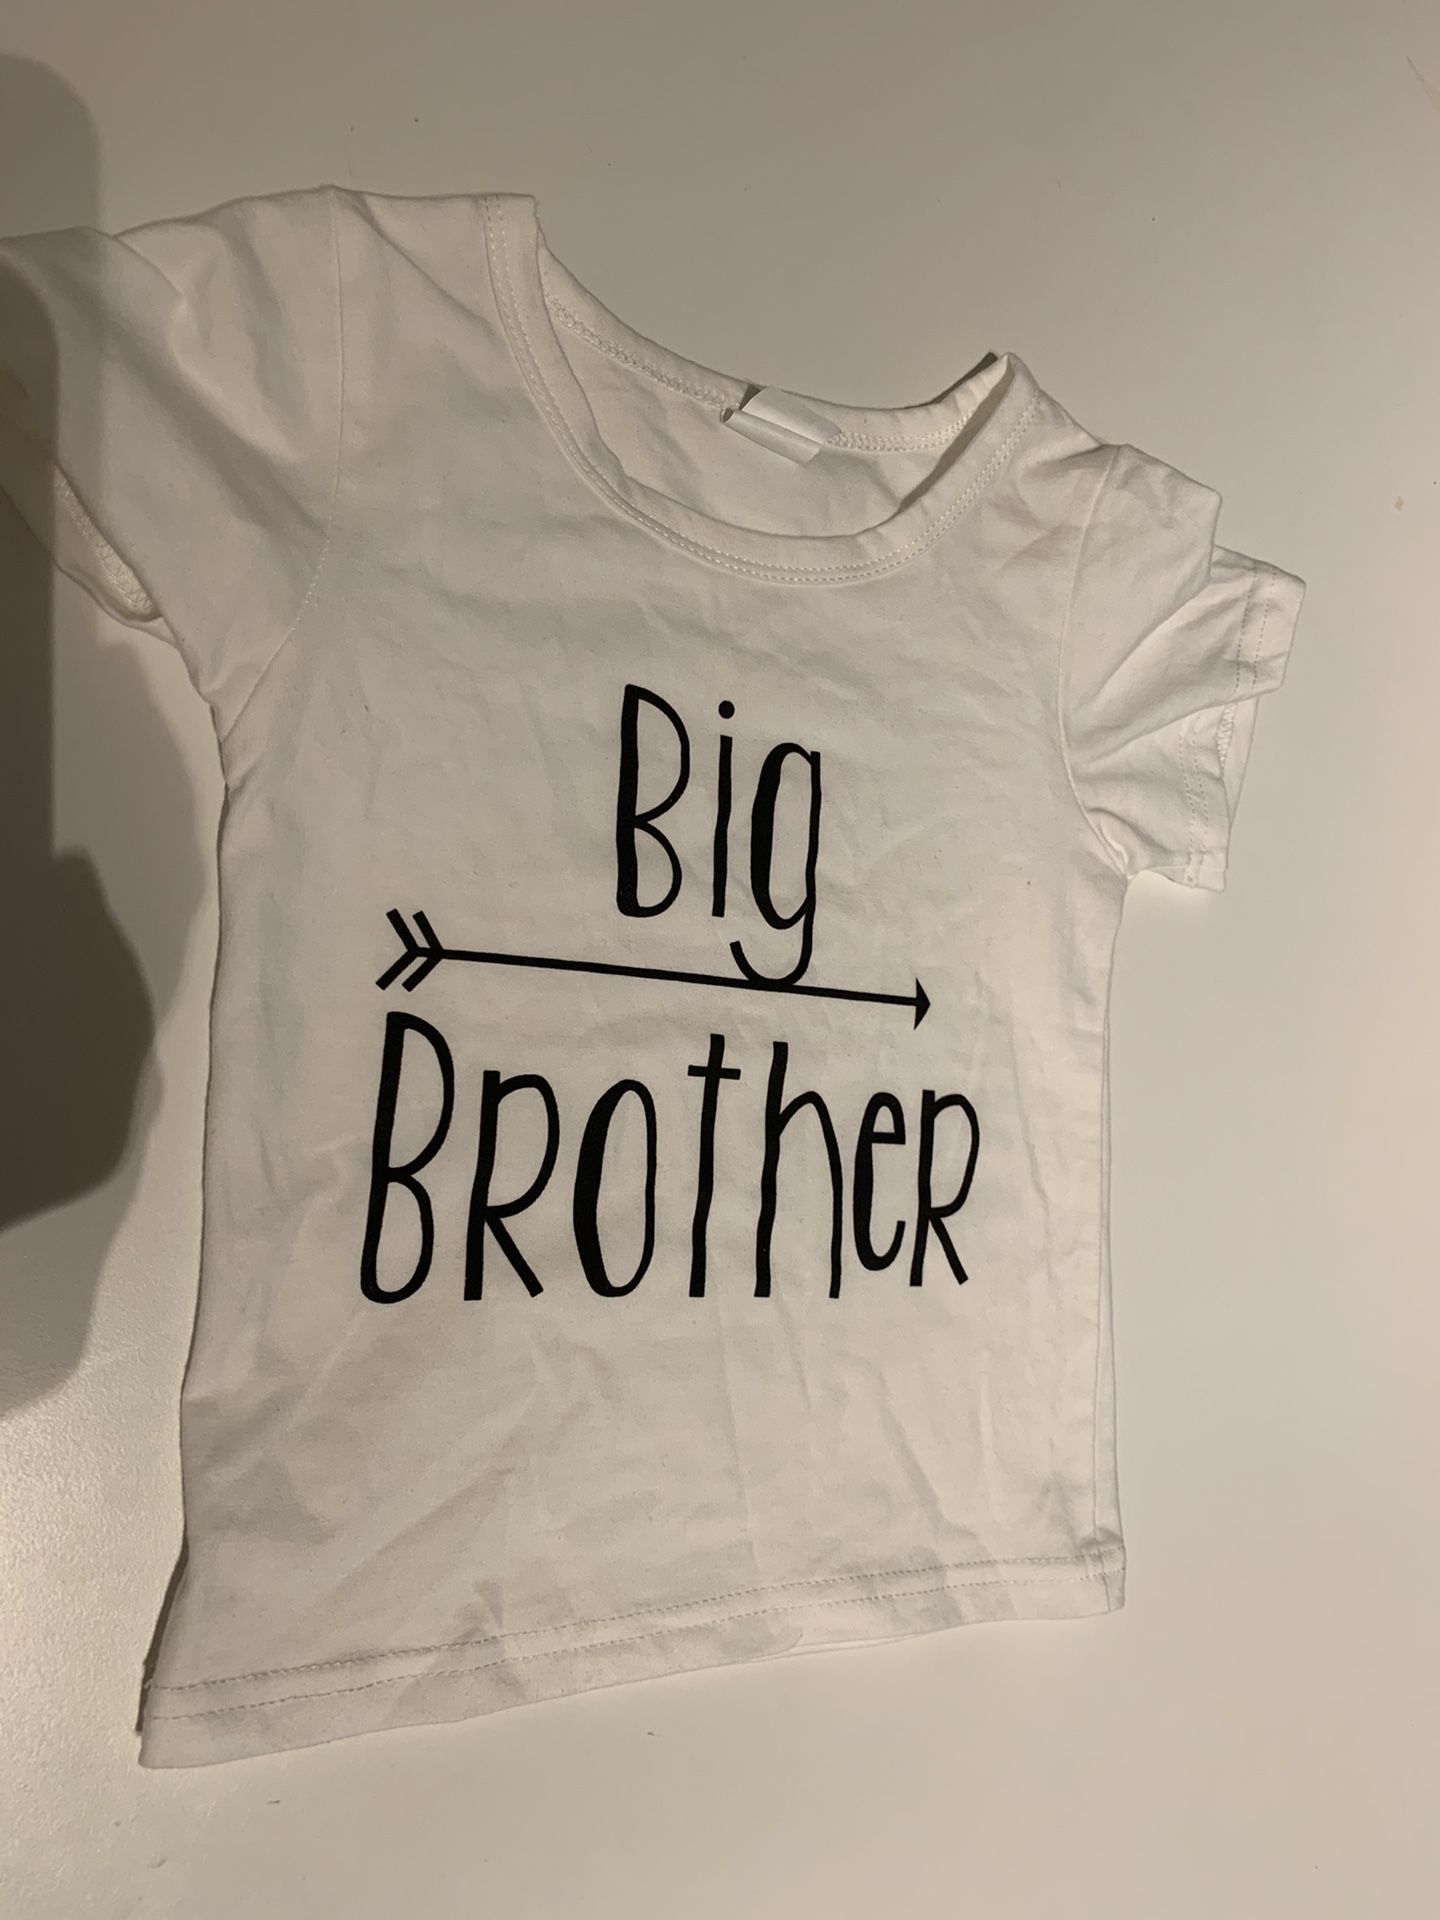 NEW- never used Big Brother T-shirt